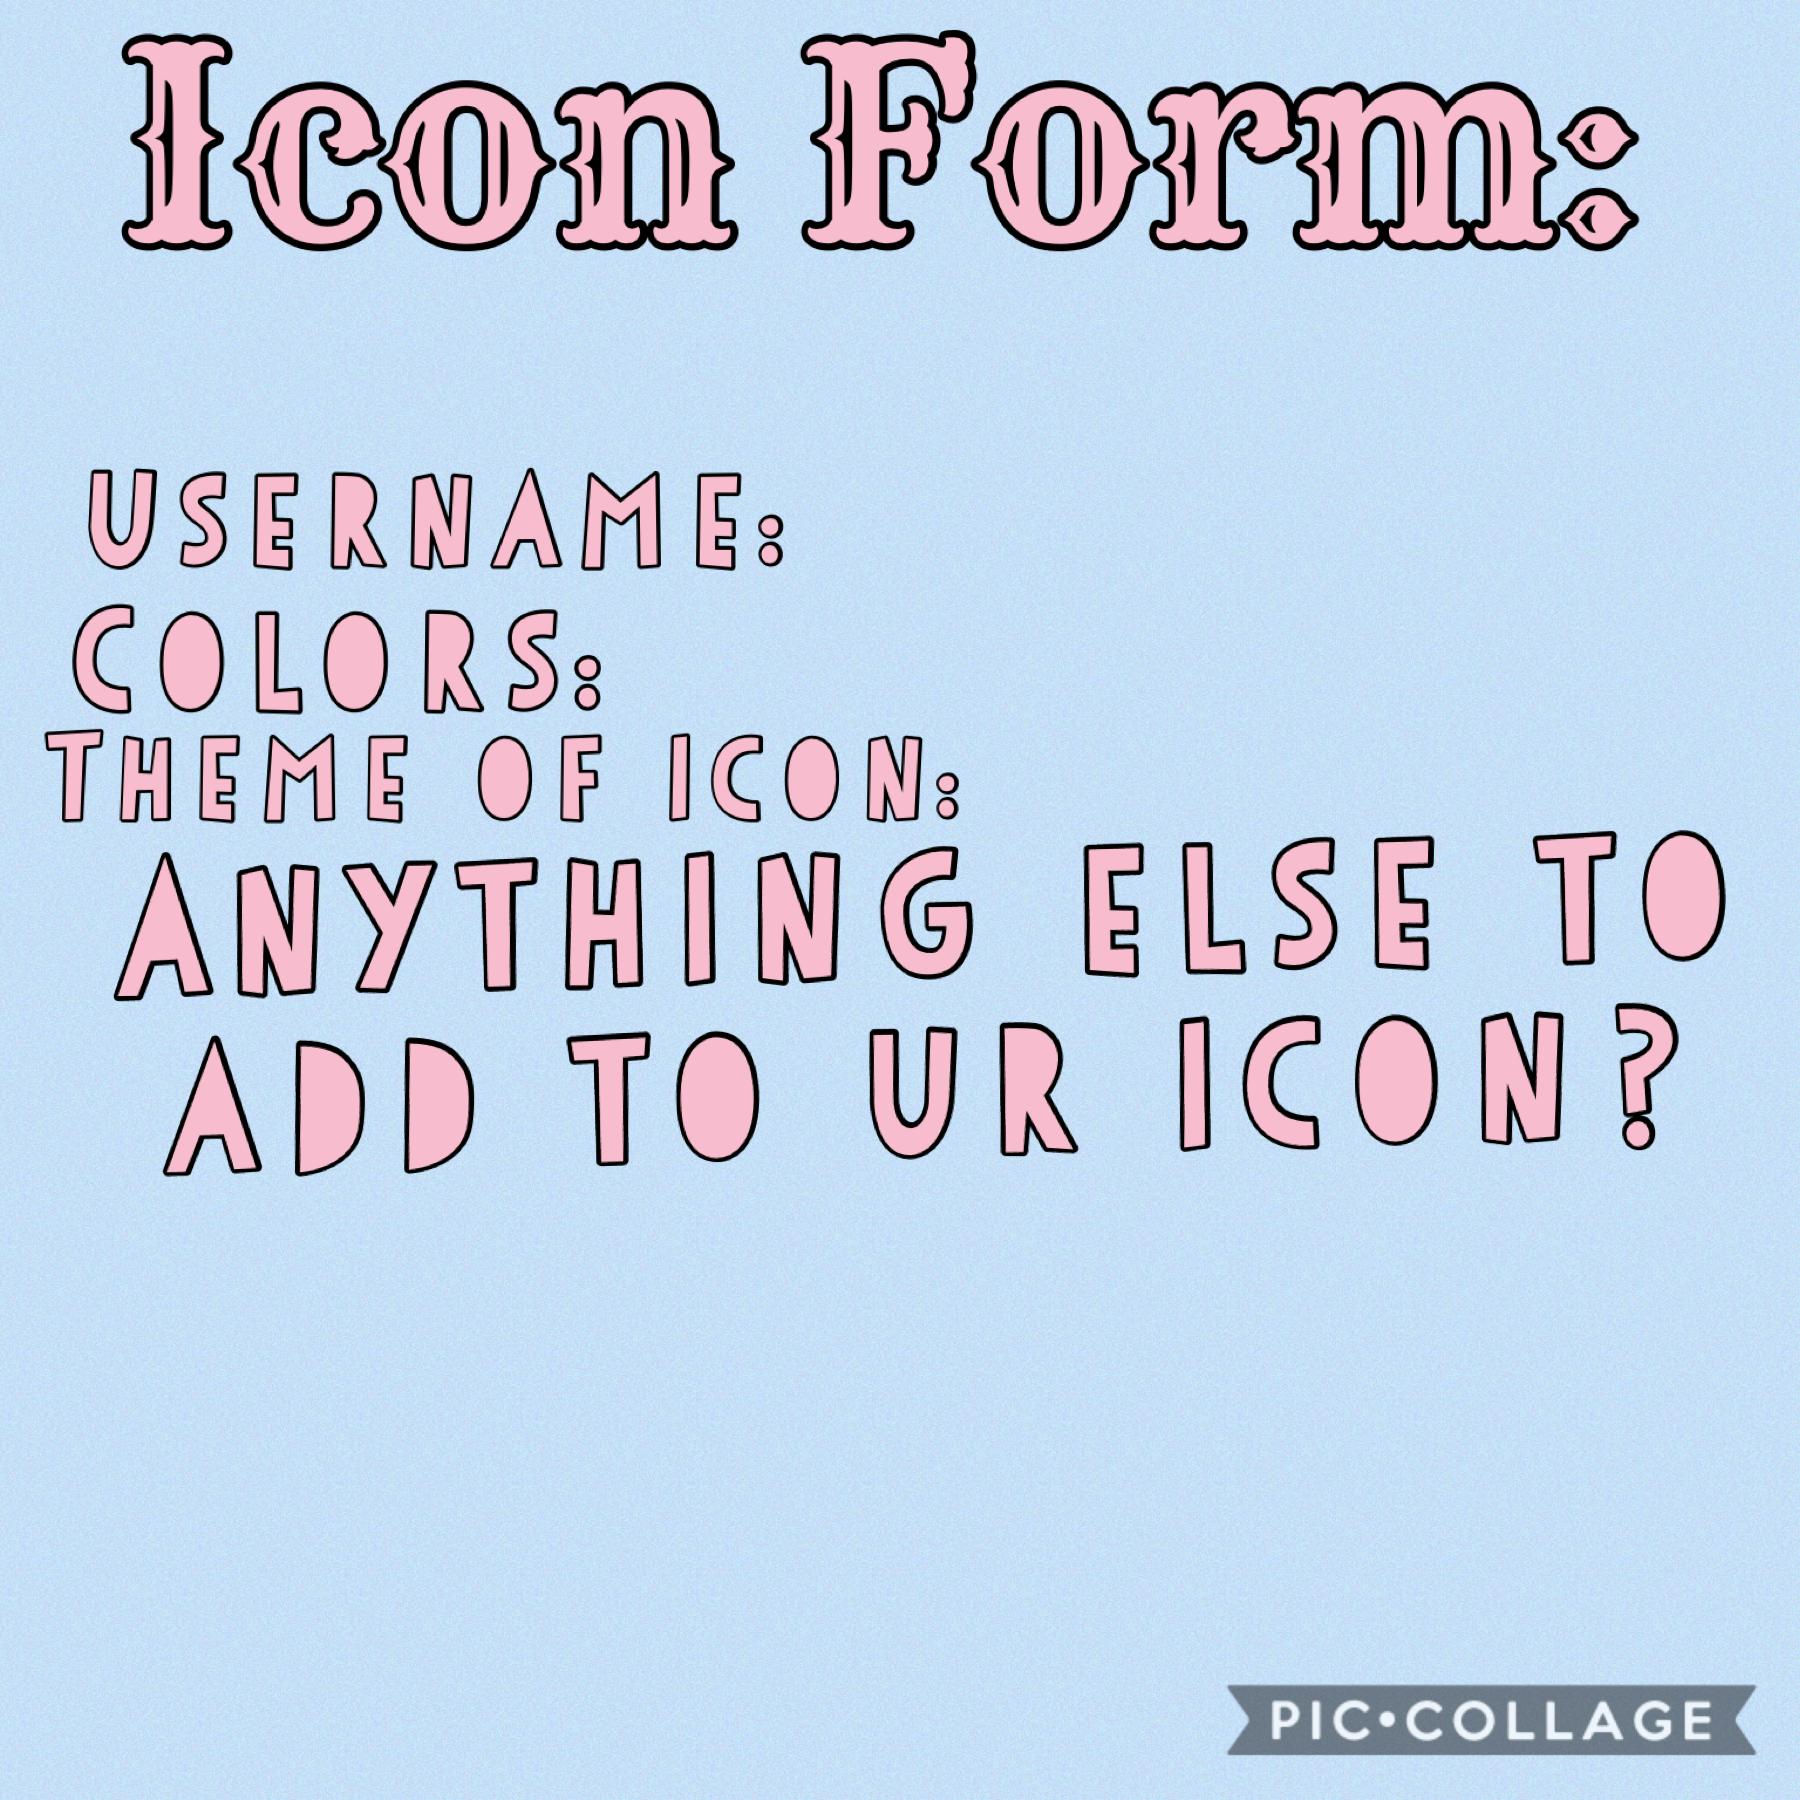 Here’s the icon form! I will do ur icons as soon as I can!